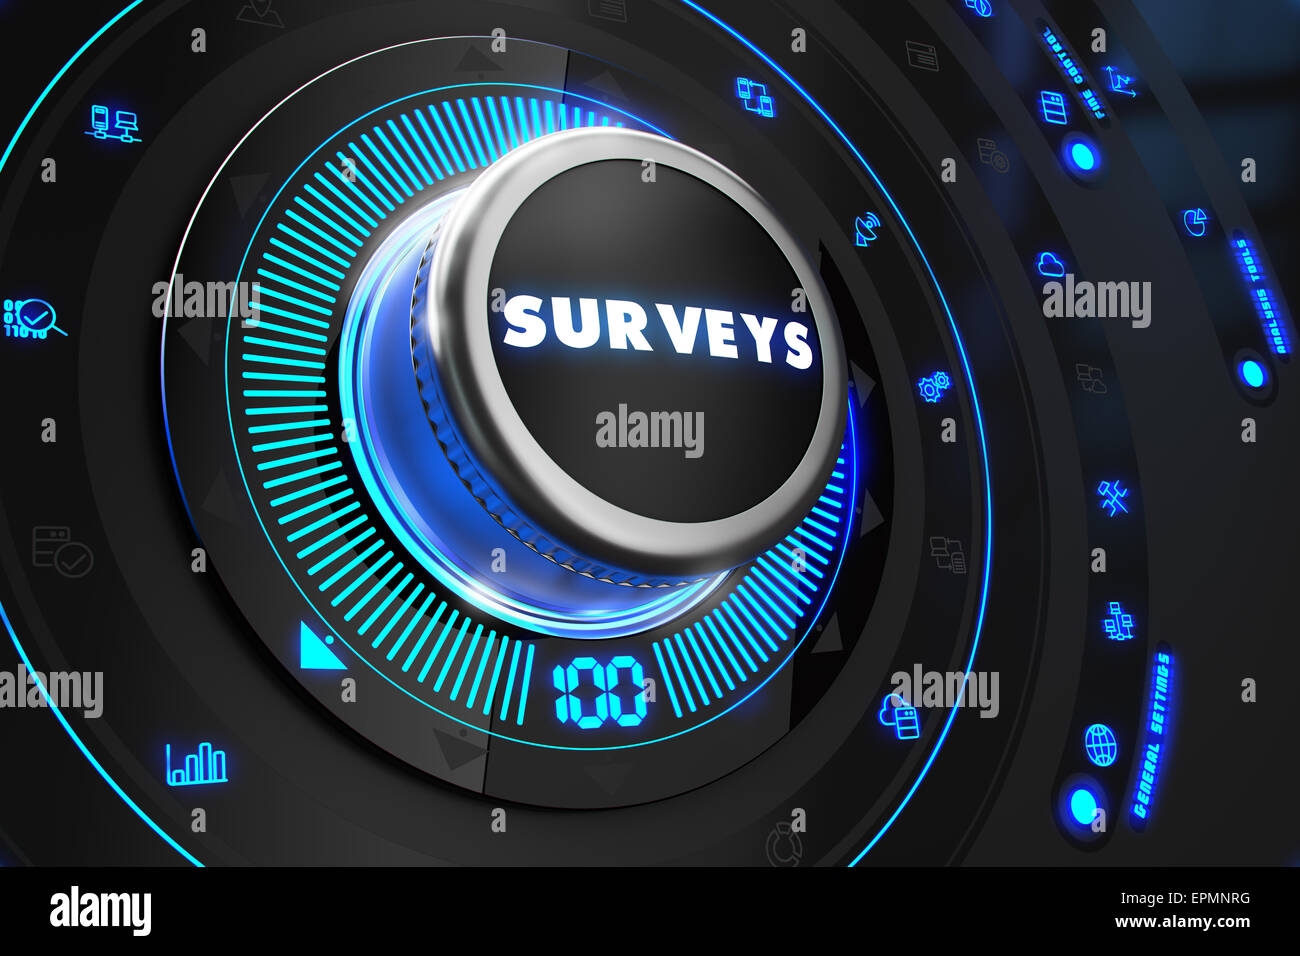 Surveys Controller on Black Control Console with Blue Backlight. Improvement, Regulation, Control or Management Concept. Stock Photo